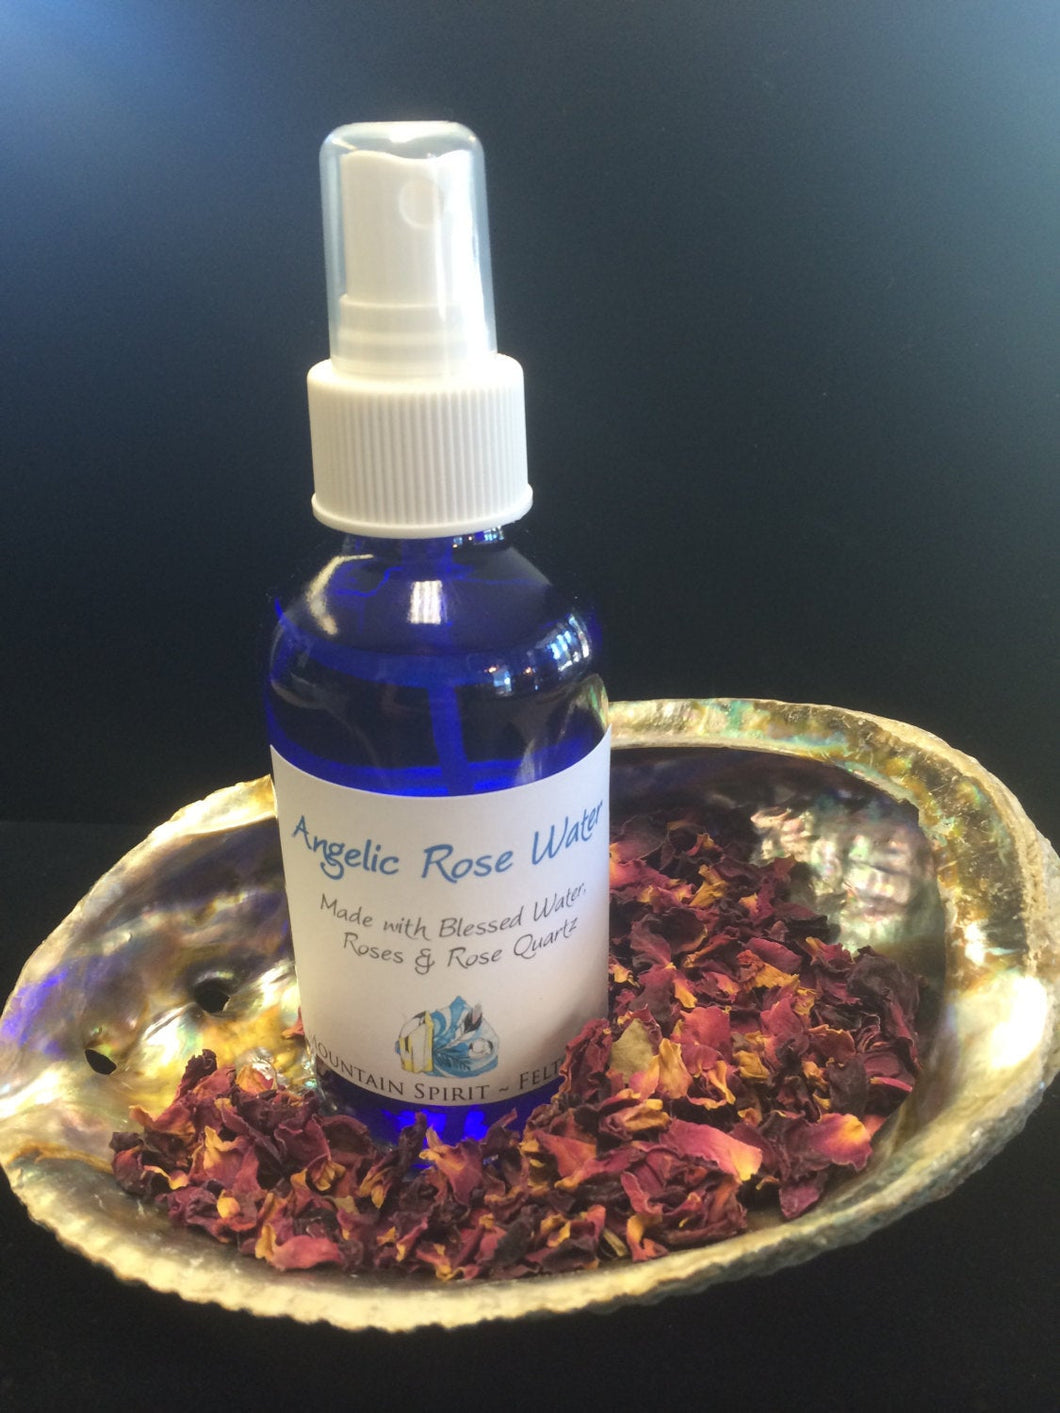 Angelic Rose Water made with Blessed Water, Rose Quartz Crystal and Magic